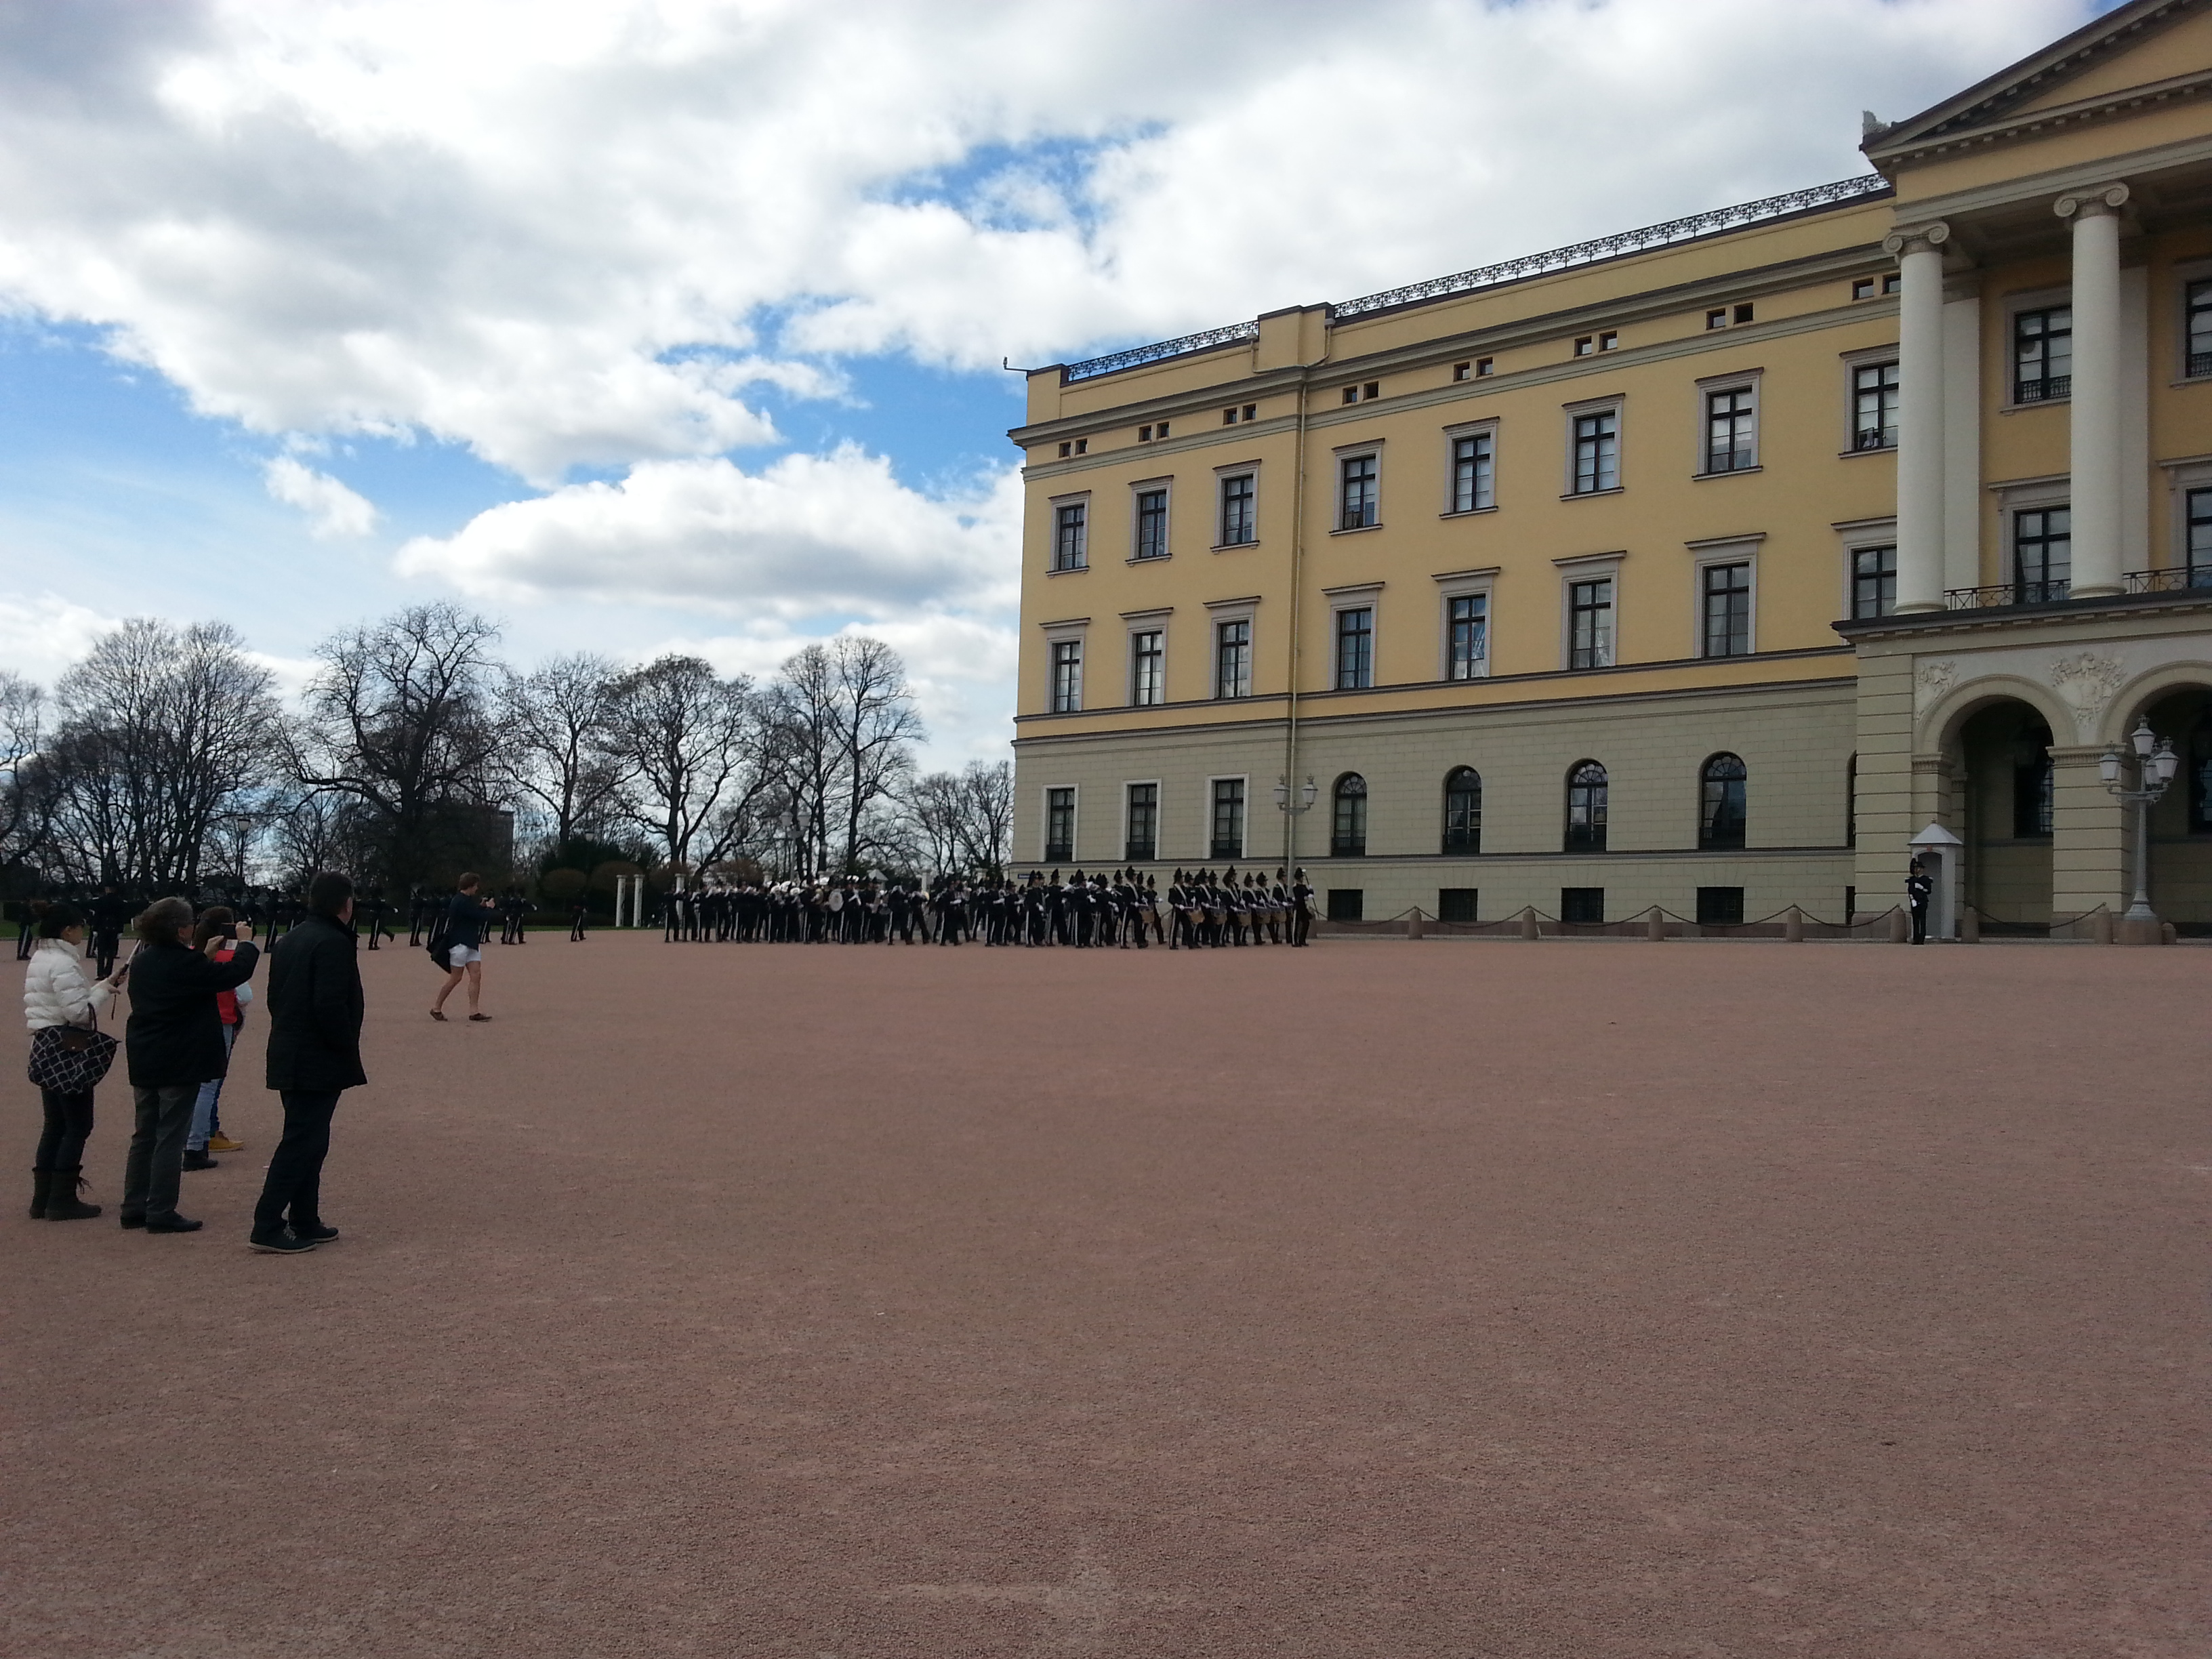 Norway’s Royal Palace Guard Exchange - Oslo